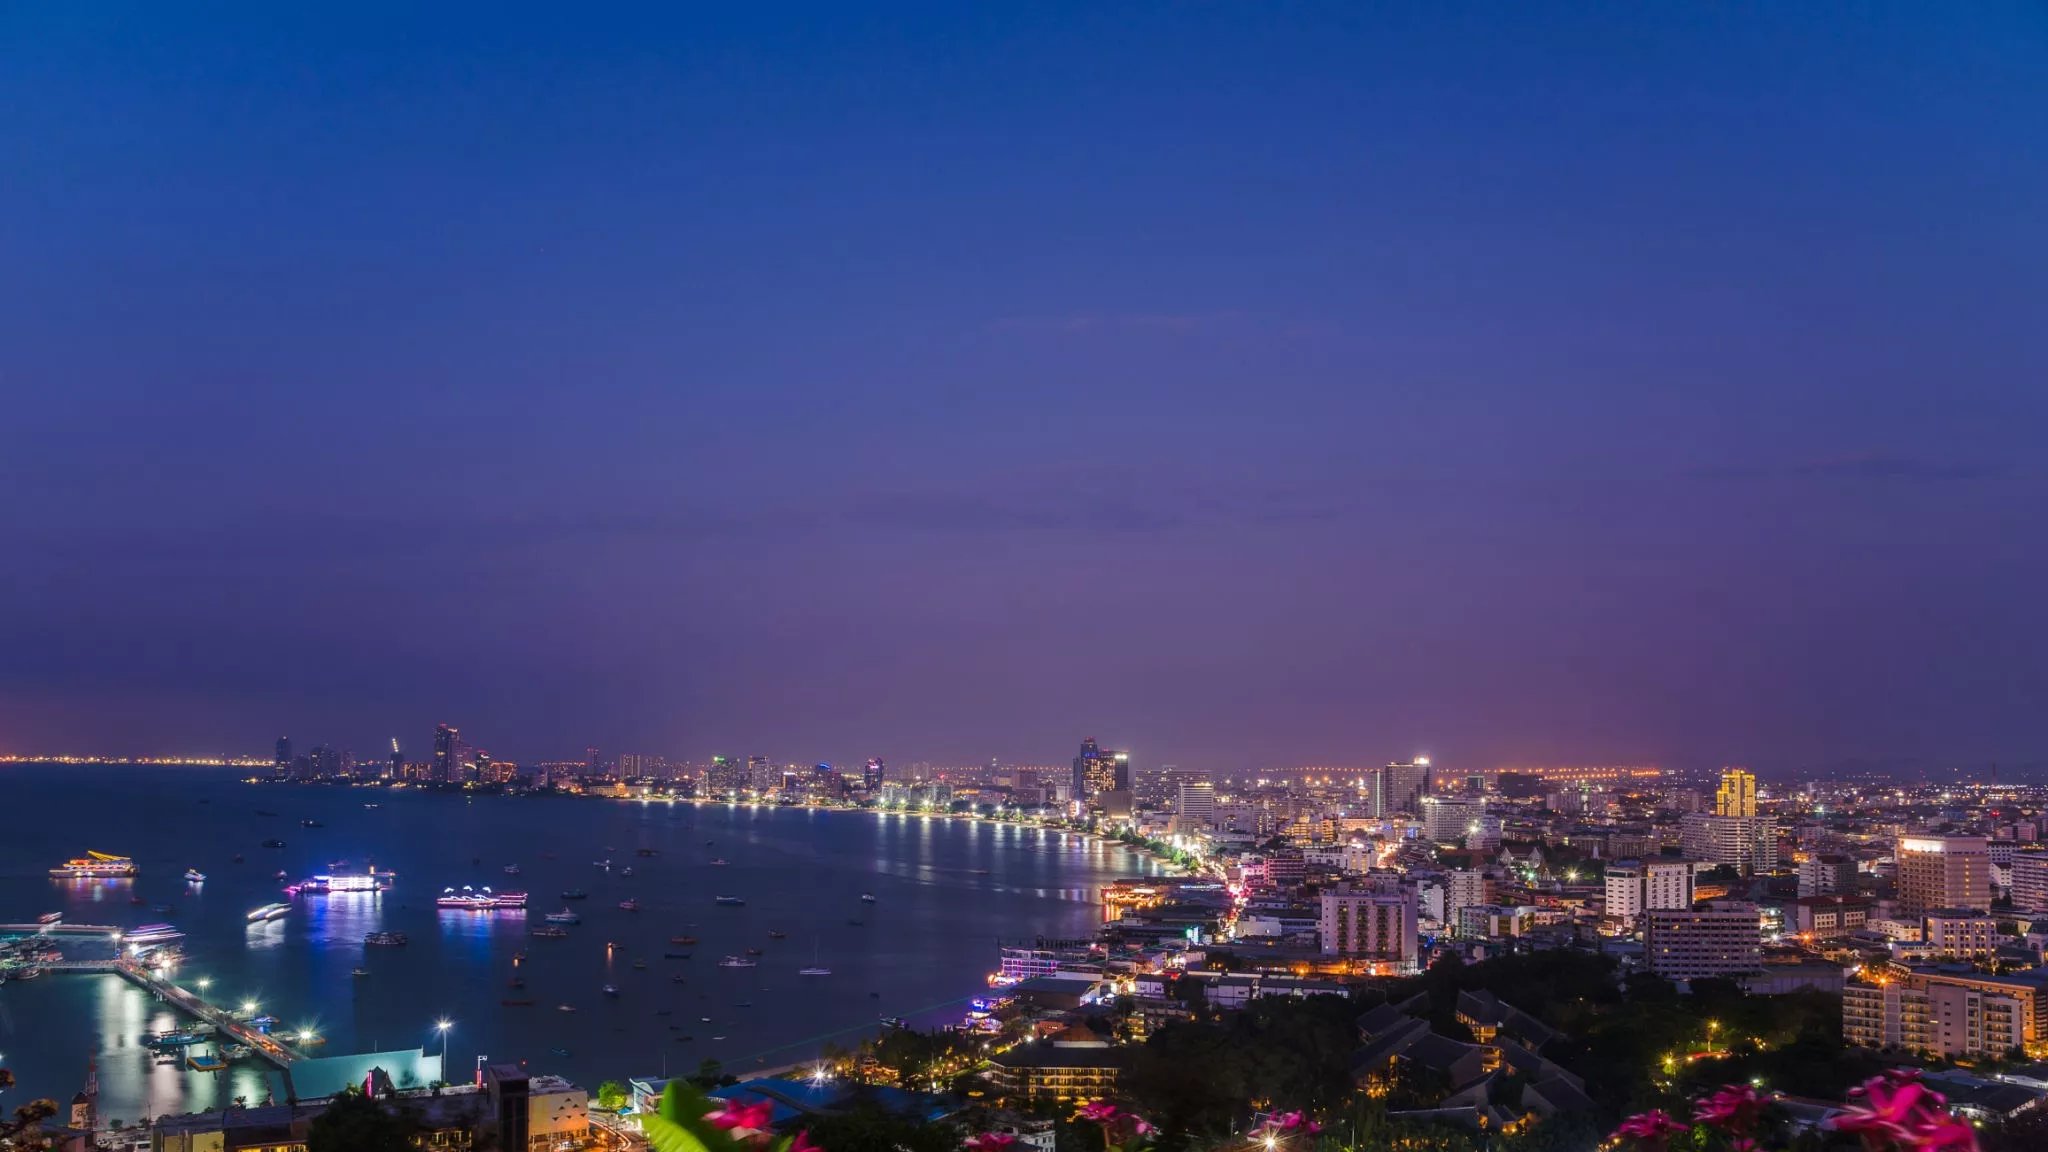 Pattaya Sea Island in Thailand, Central Asia | Observation Decks - Rated 3.5